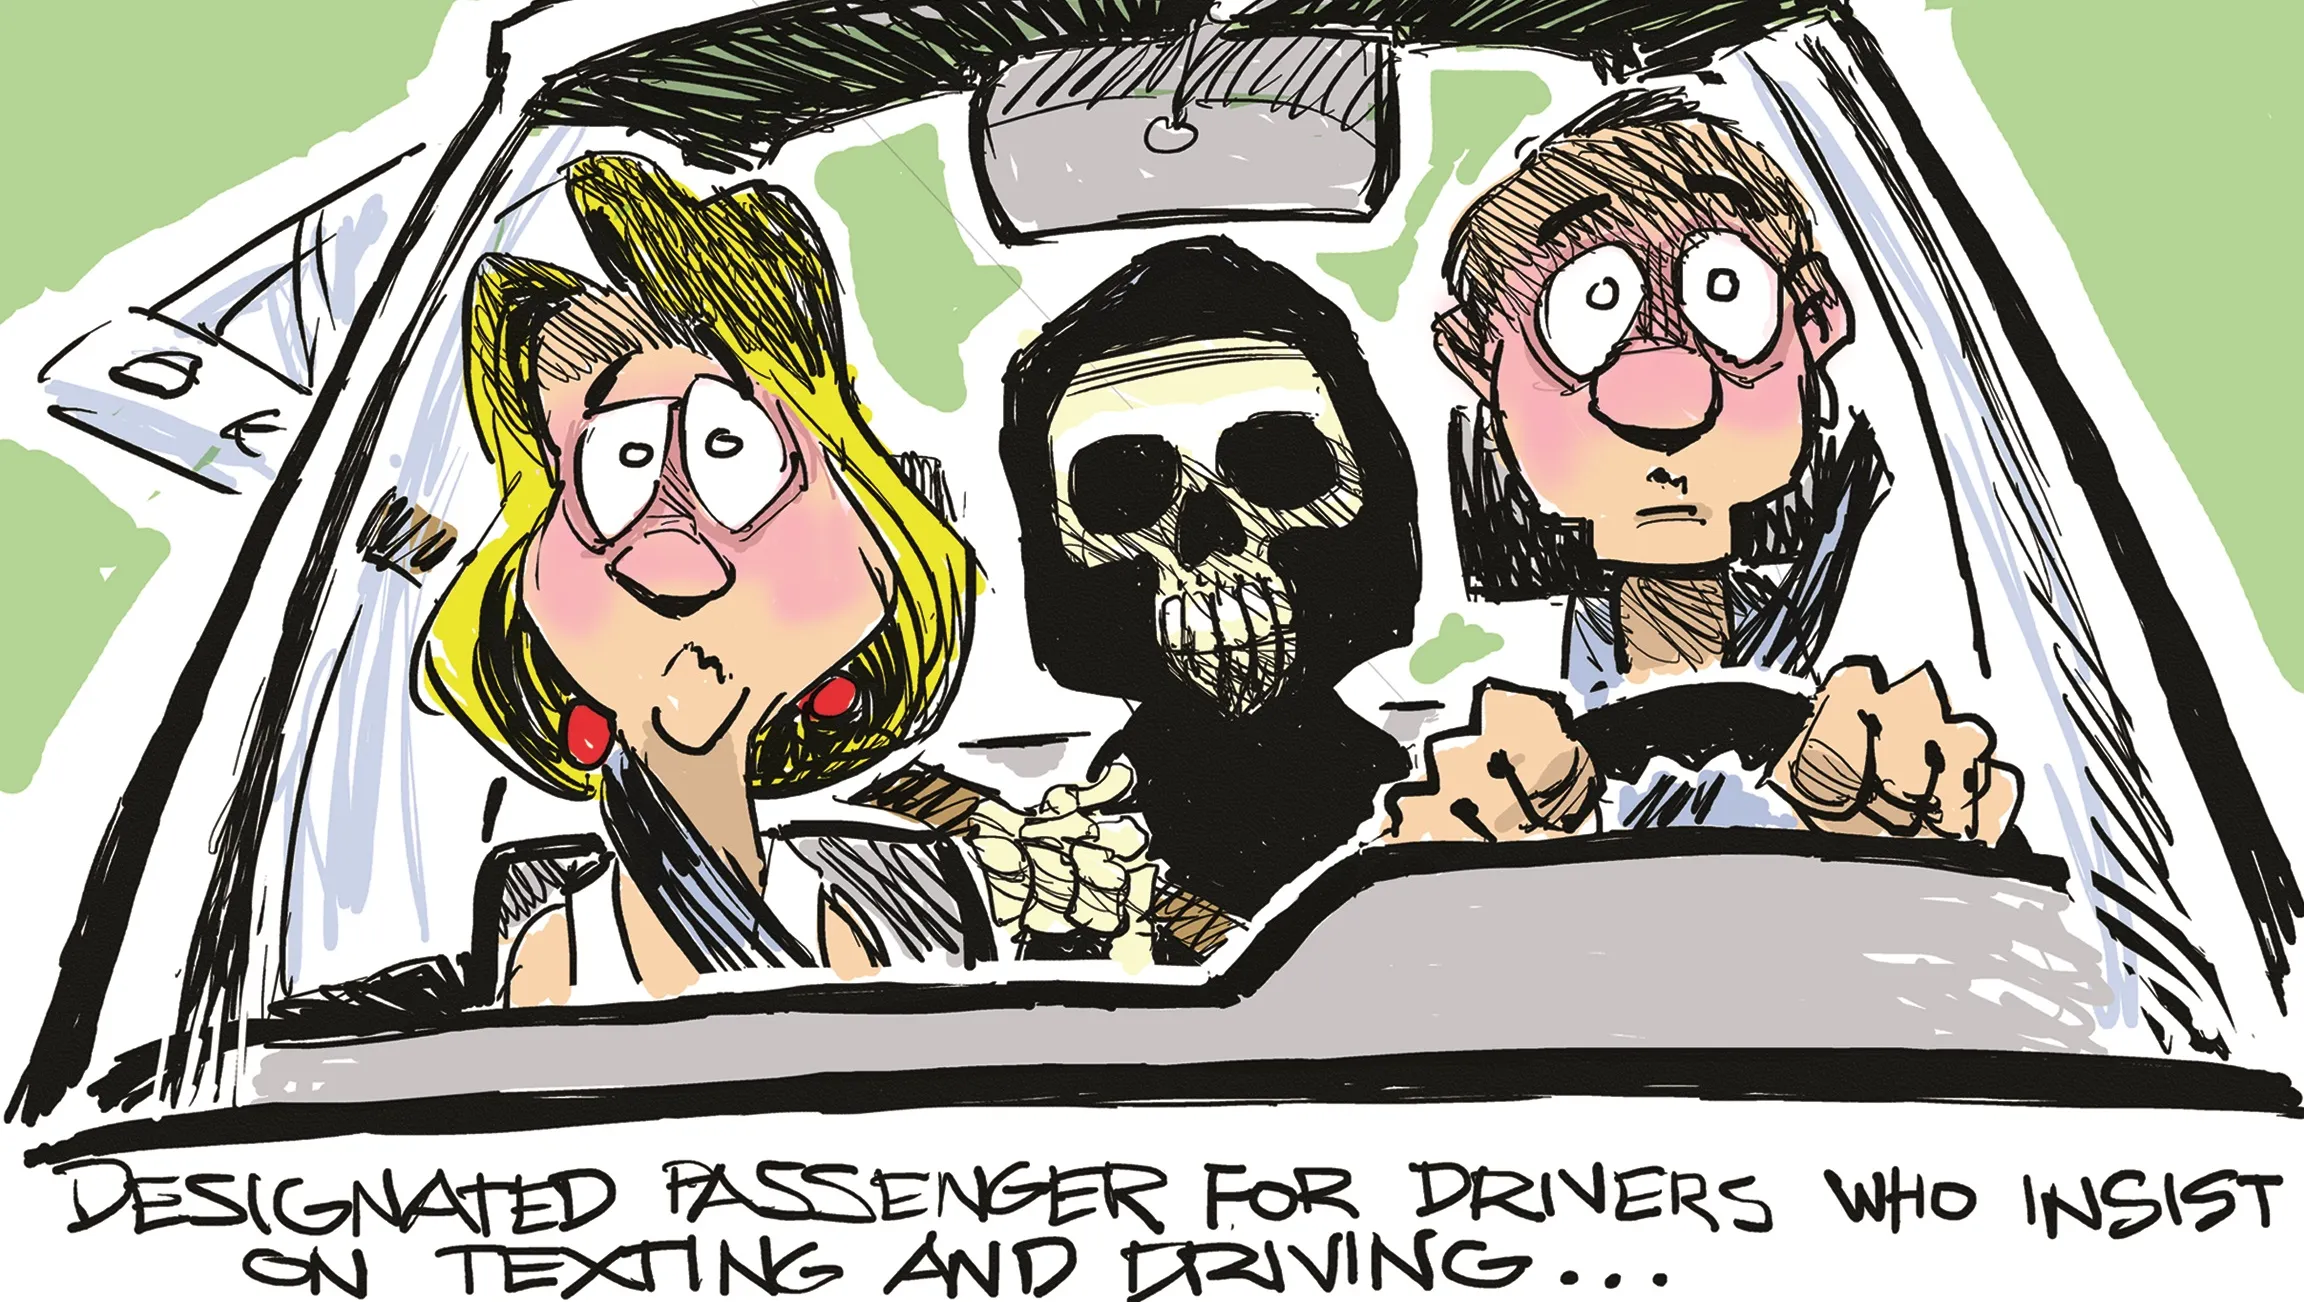 Grim Reaper Is A Designated Passenger For Texting Drivers